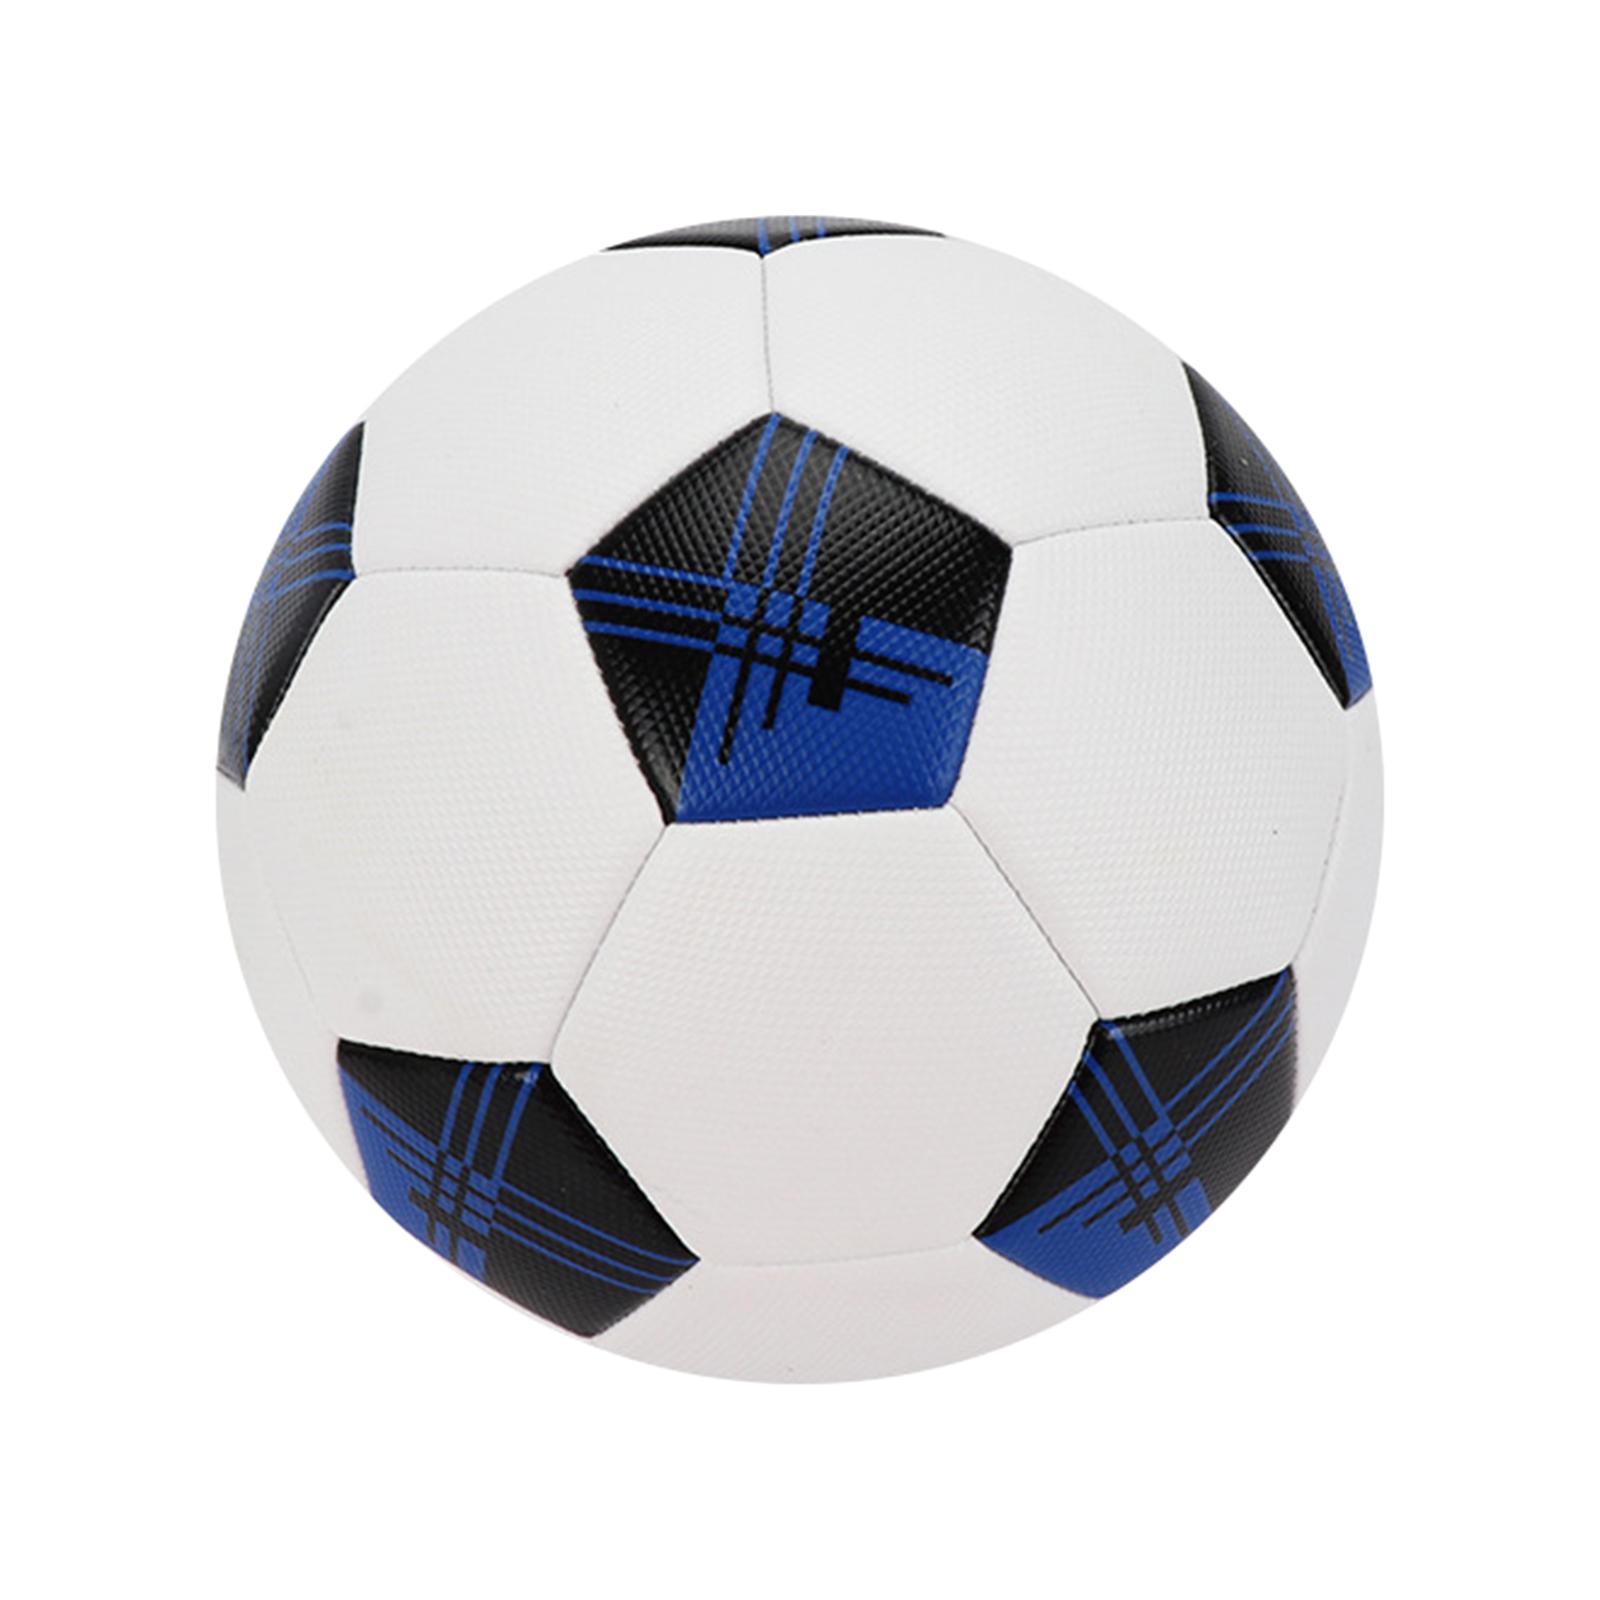 Football Official Size 5 Team Sports Gifts Ball Toys Quality Blue Black 